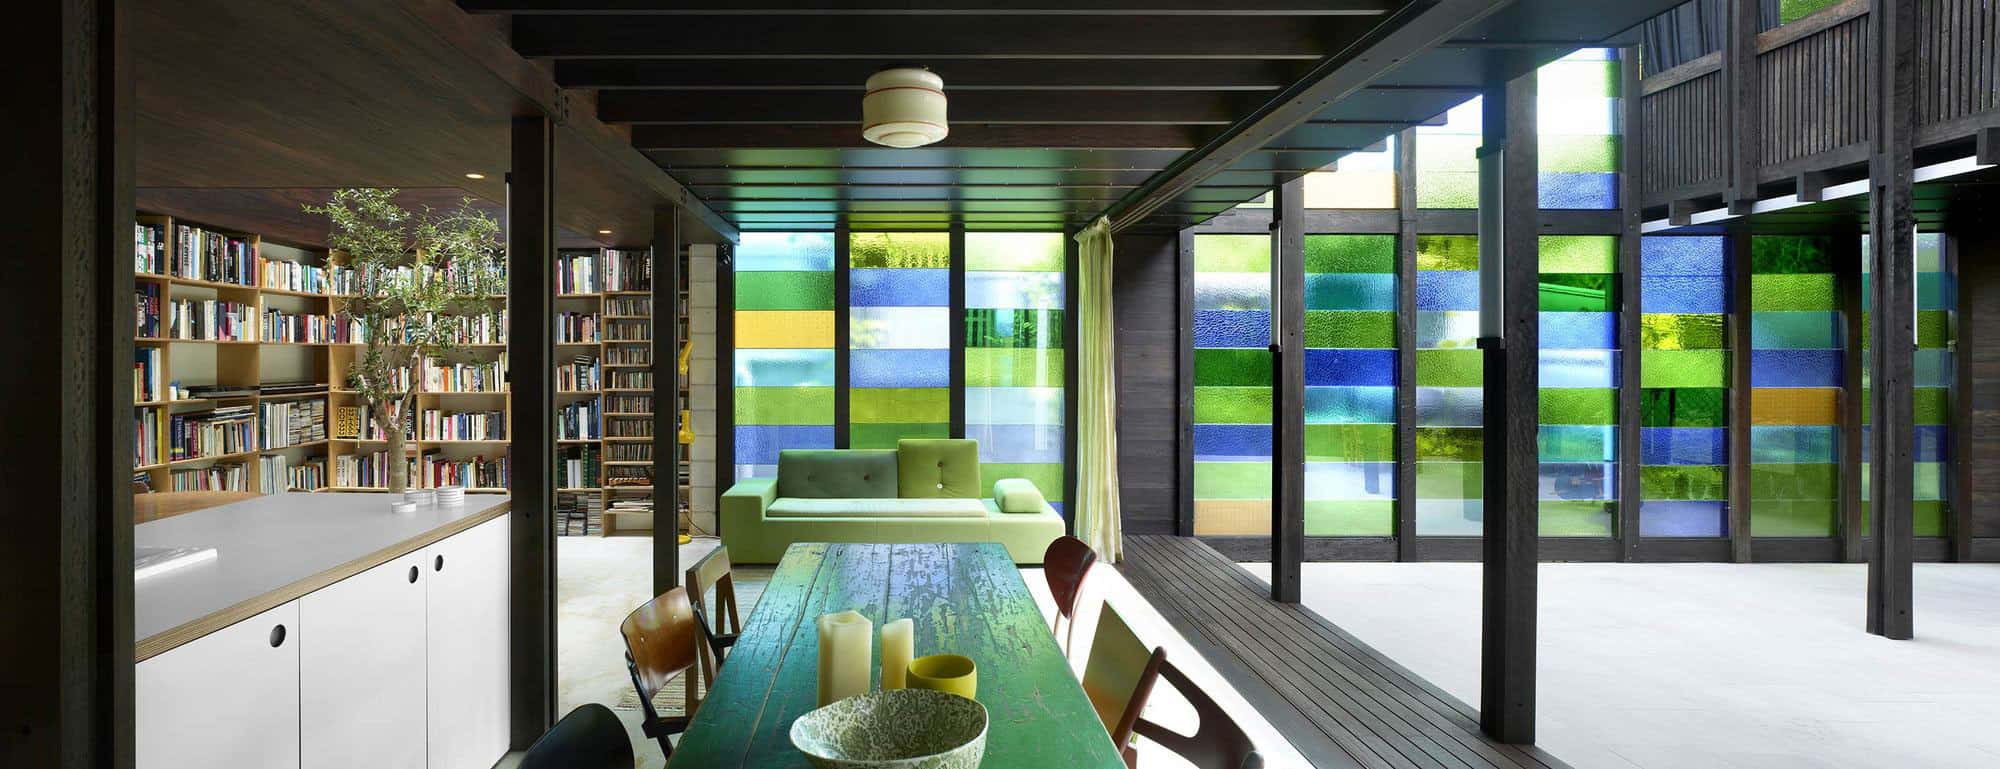 Cottage with Colored Glass Walls and Pre-existing Trees